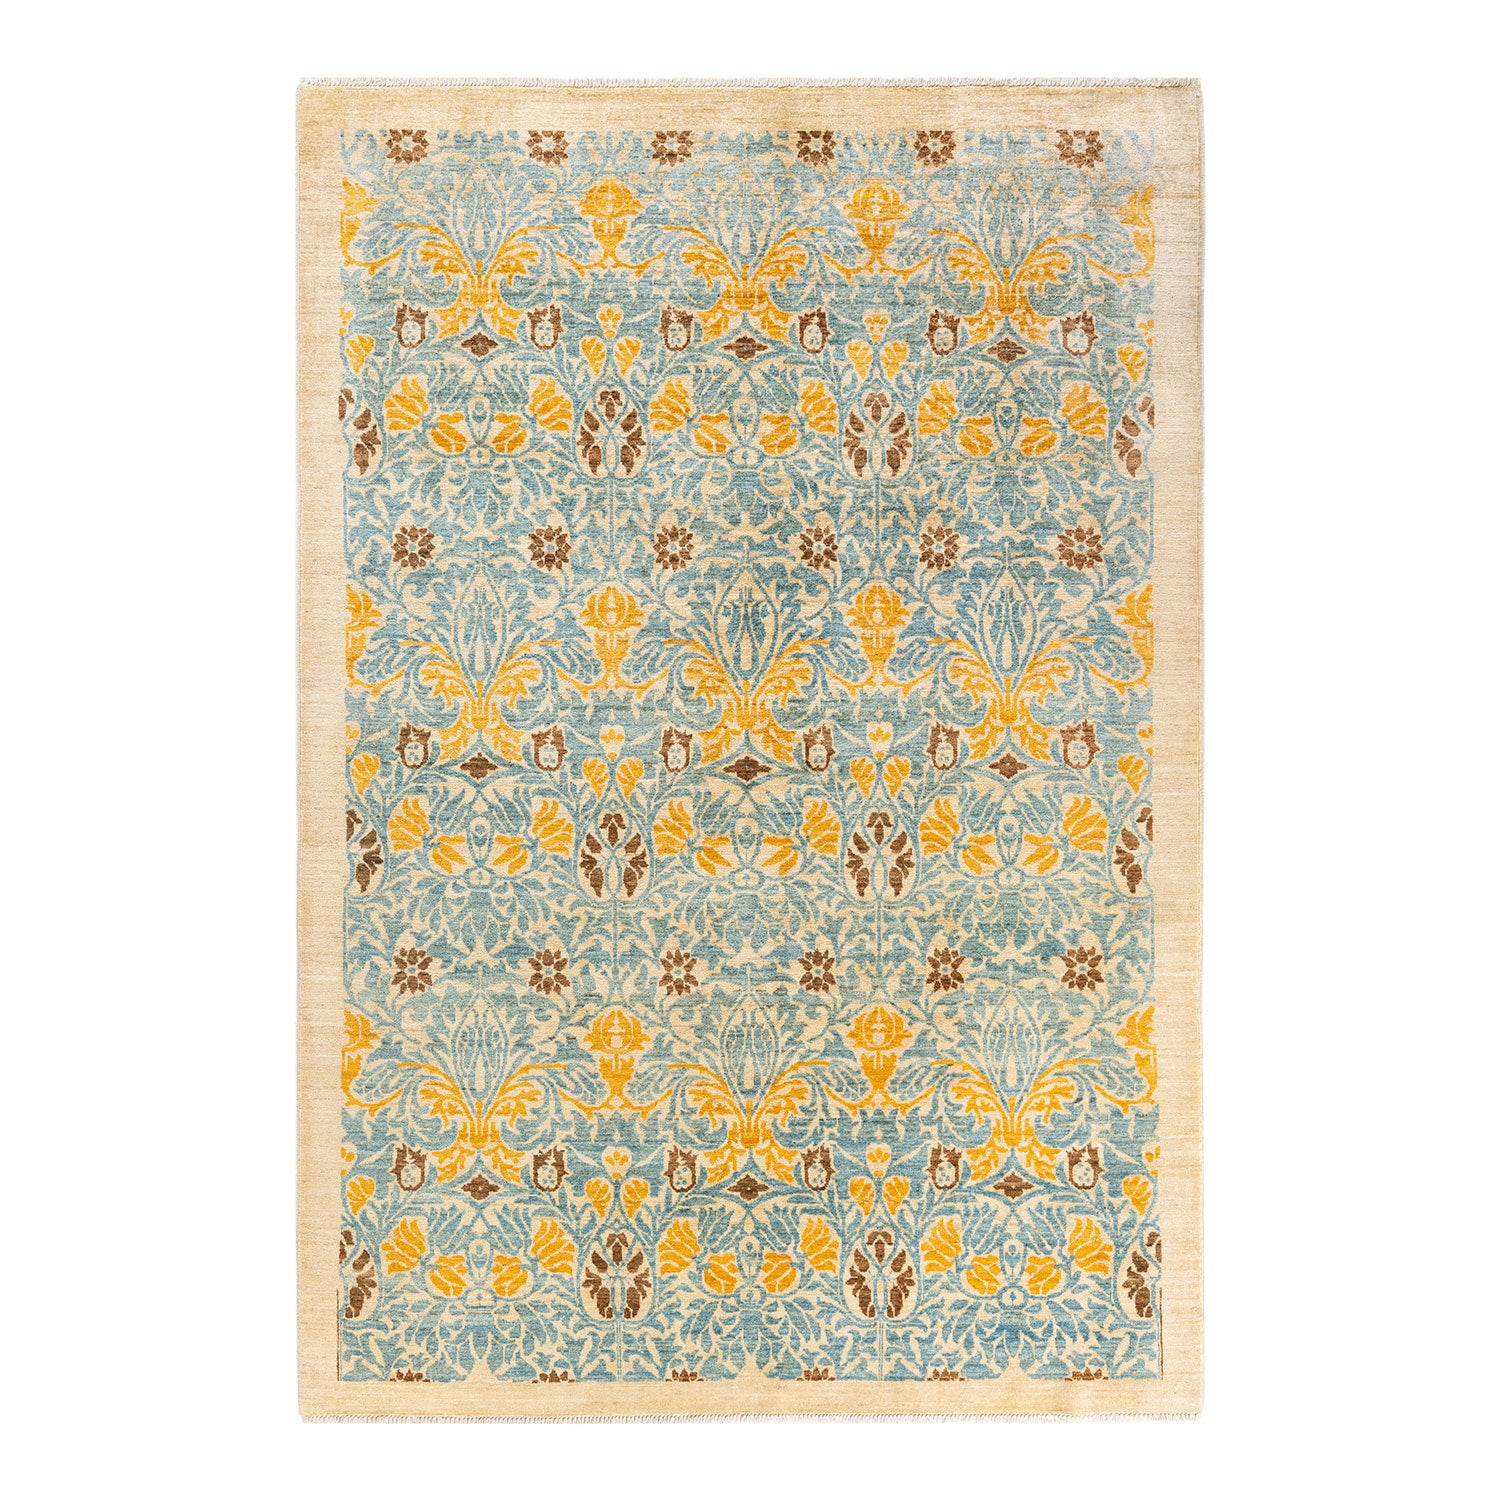 Exquisite Persian-inspired rug with intricate floral motifs and muted colors.